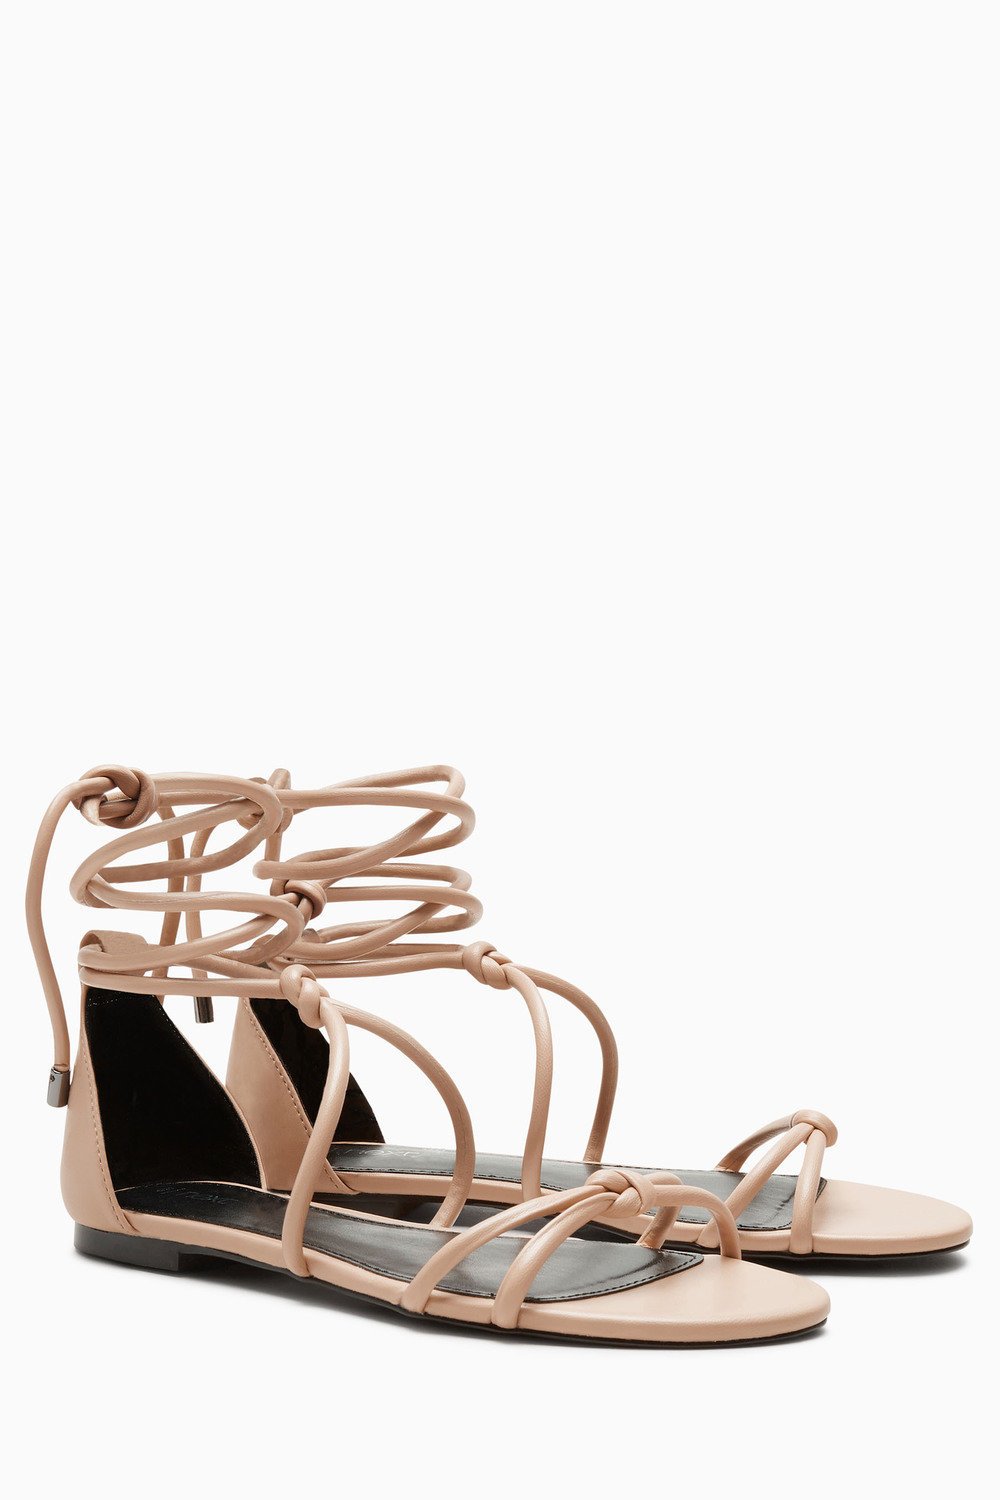 Next Womens/Girls Nude Tube Knot Sandals - Stockpoint Apparel Outlet